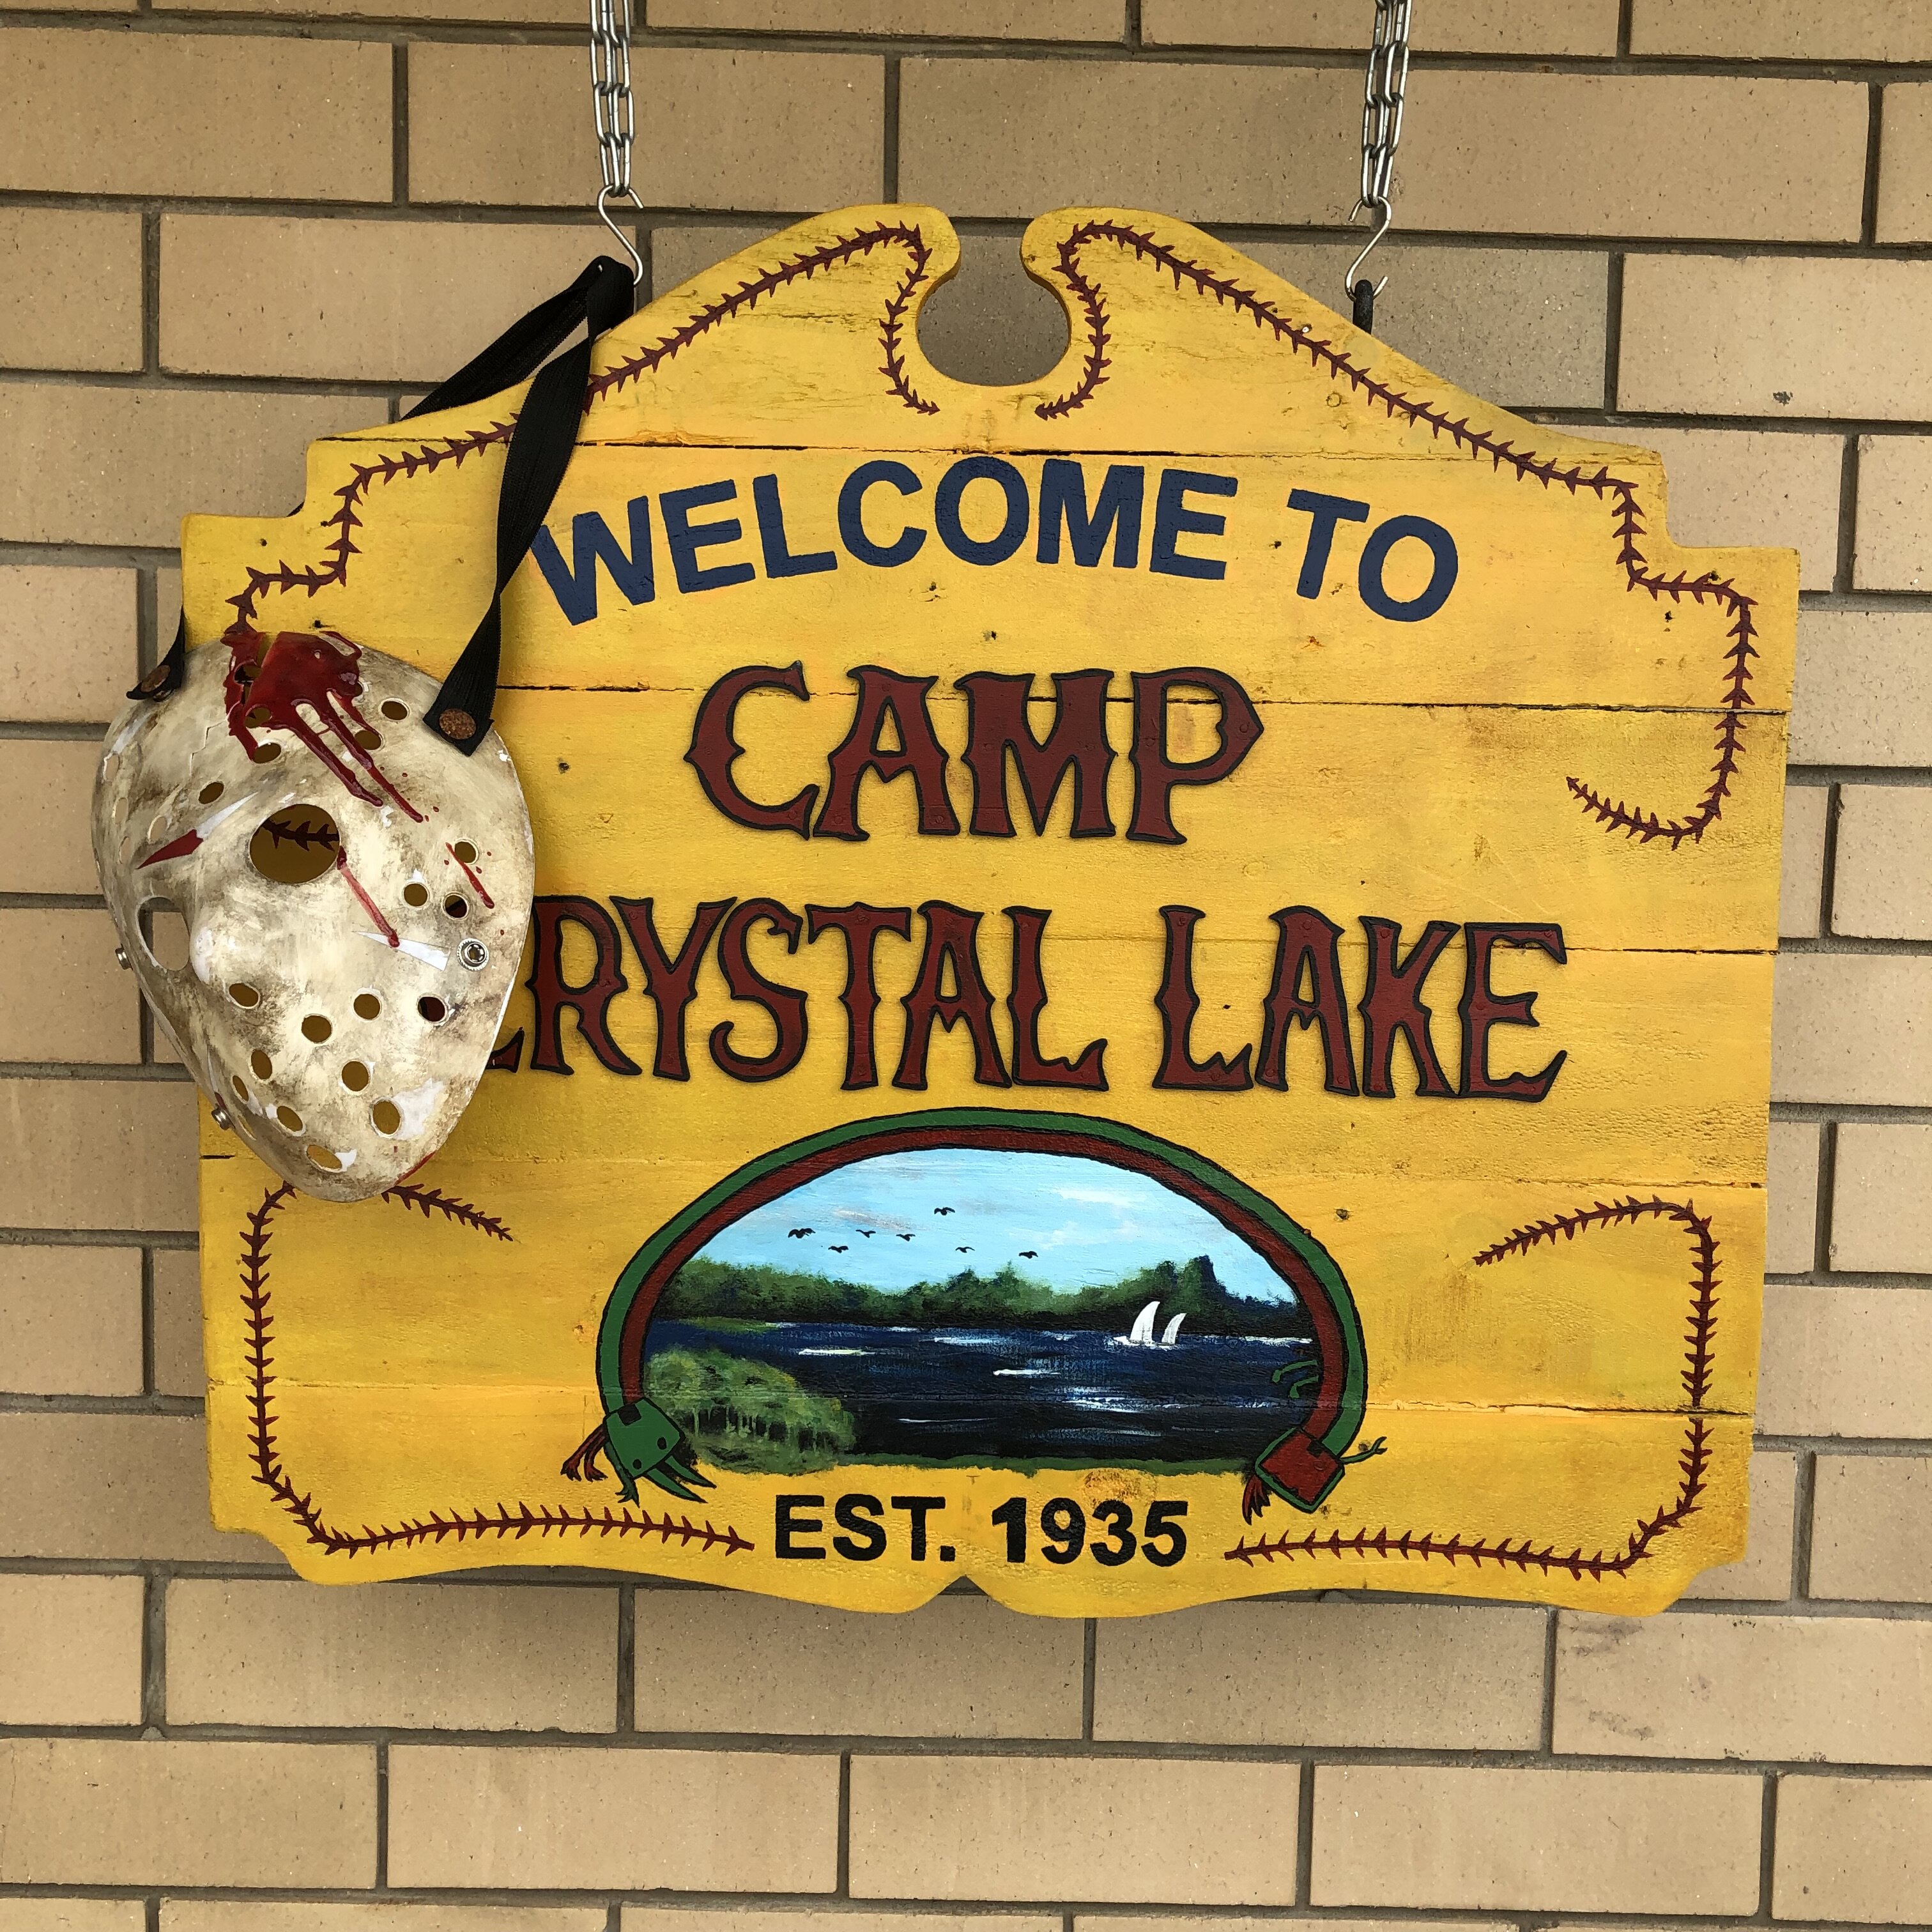 Camp Crystal Lake replica sign (Happy Friday the 13th) | RPF